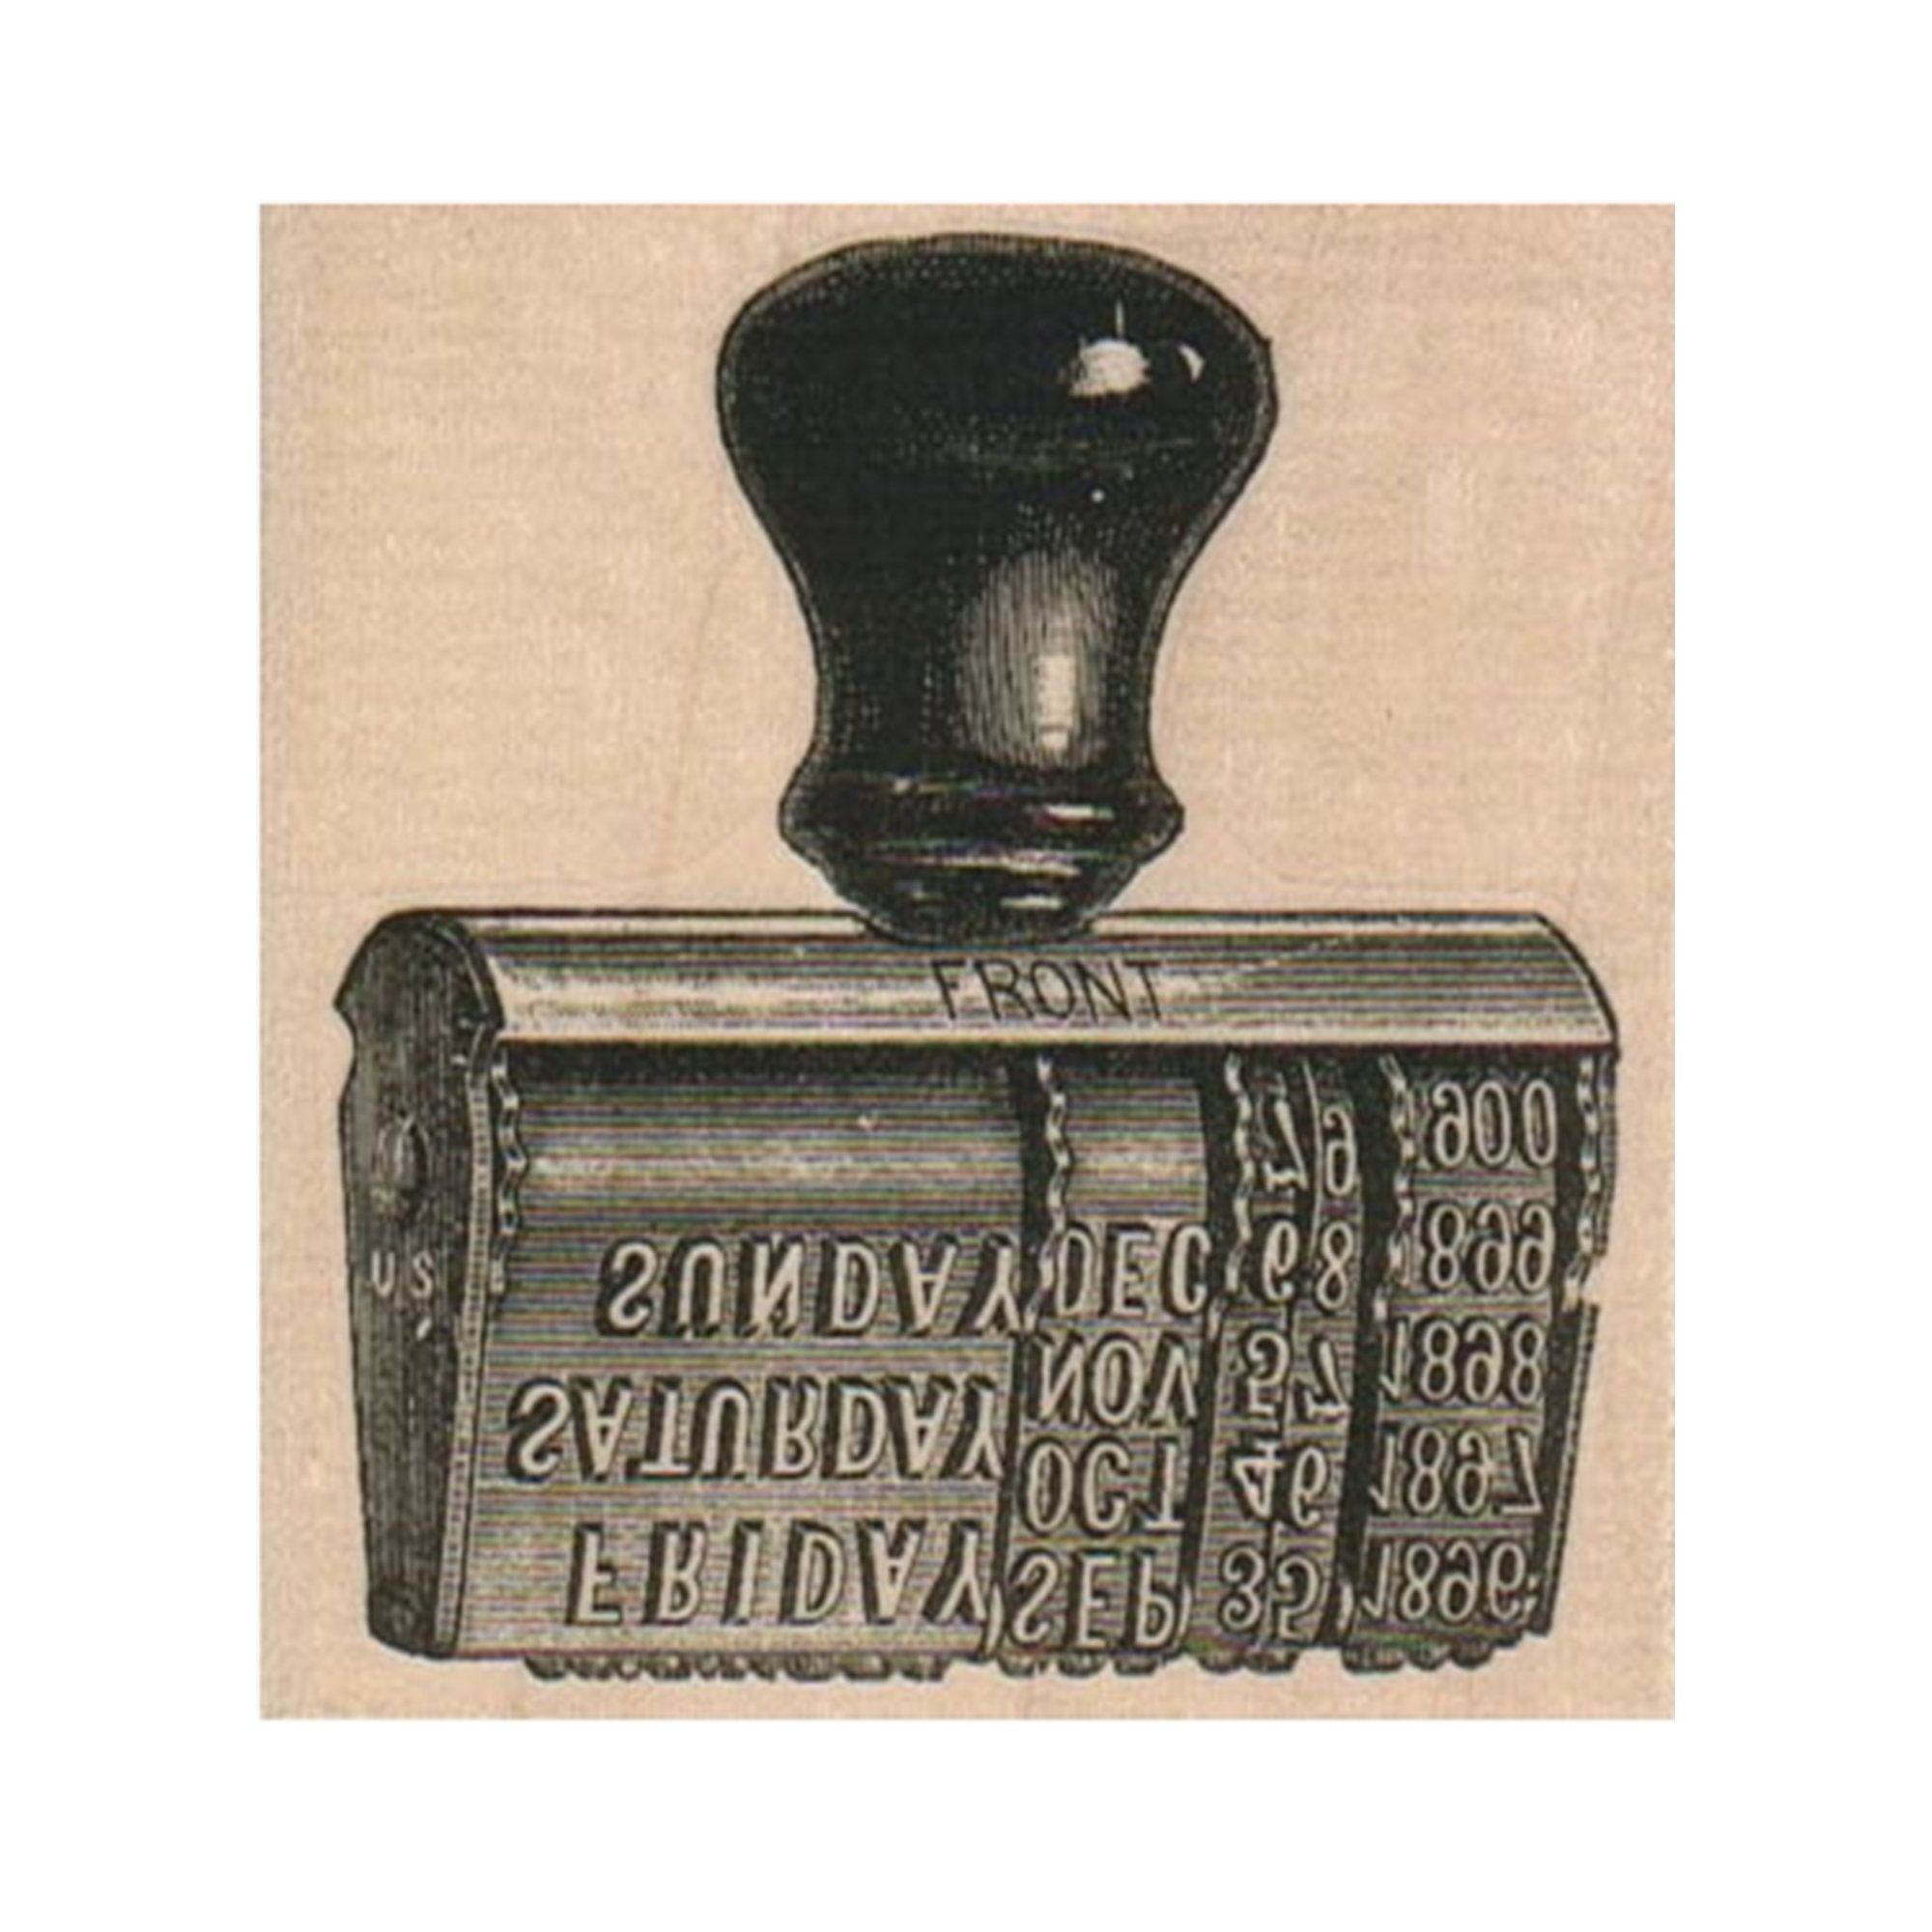 Wedding Vintage-style Rubber Stamp with Handle #2063 - Round 1 7/8 in 2023